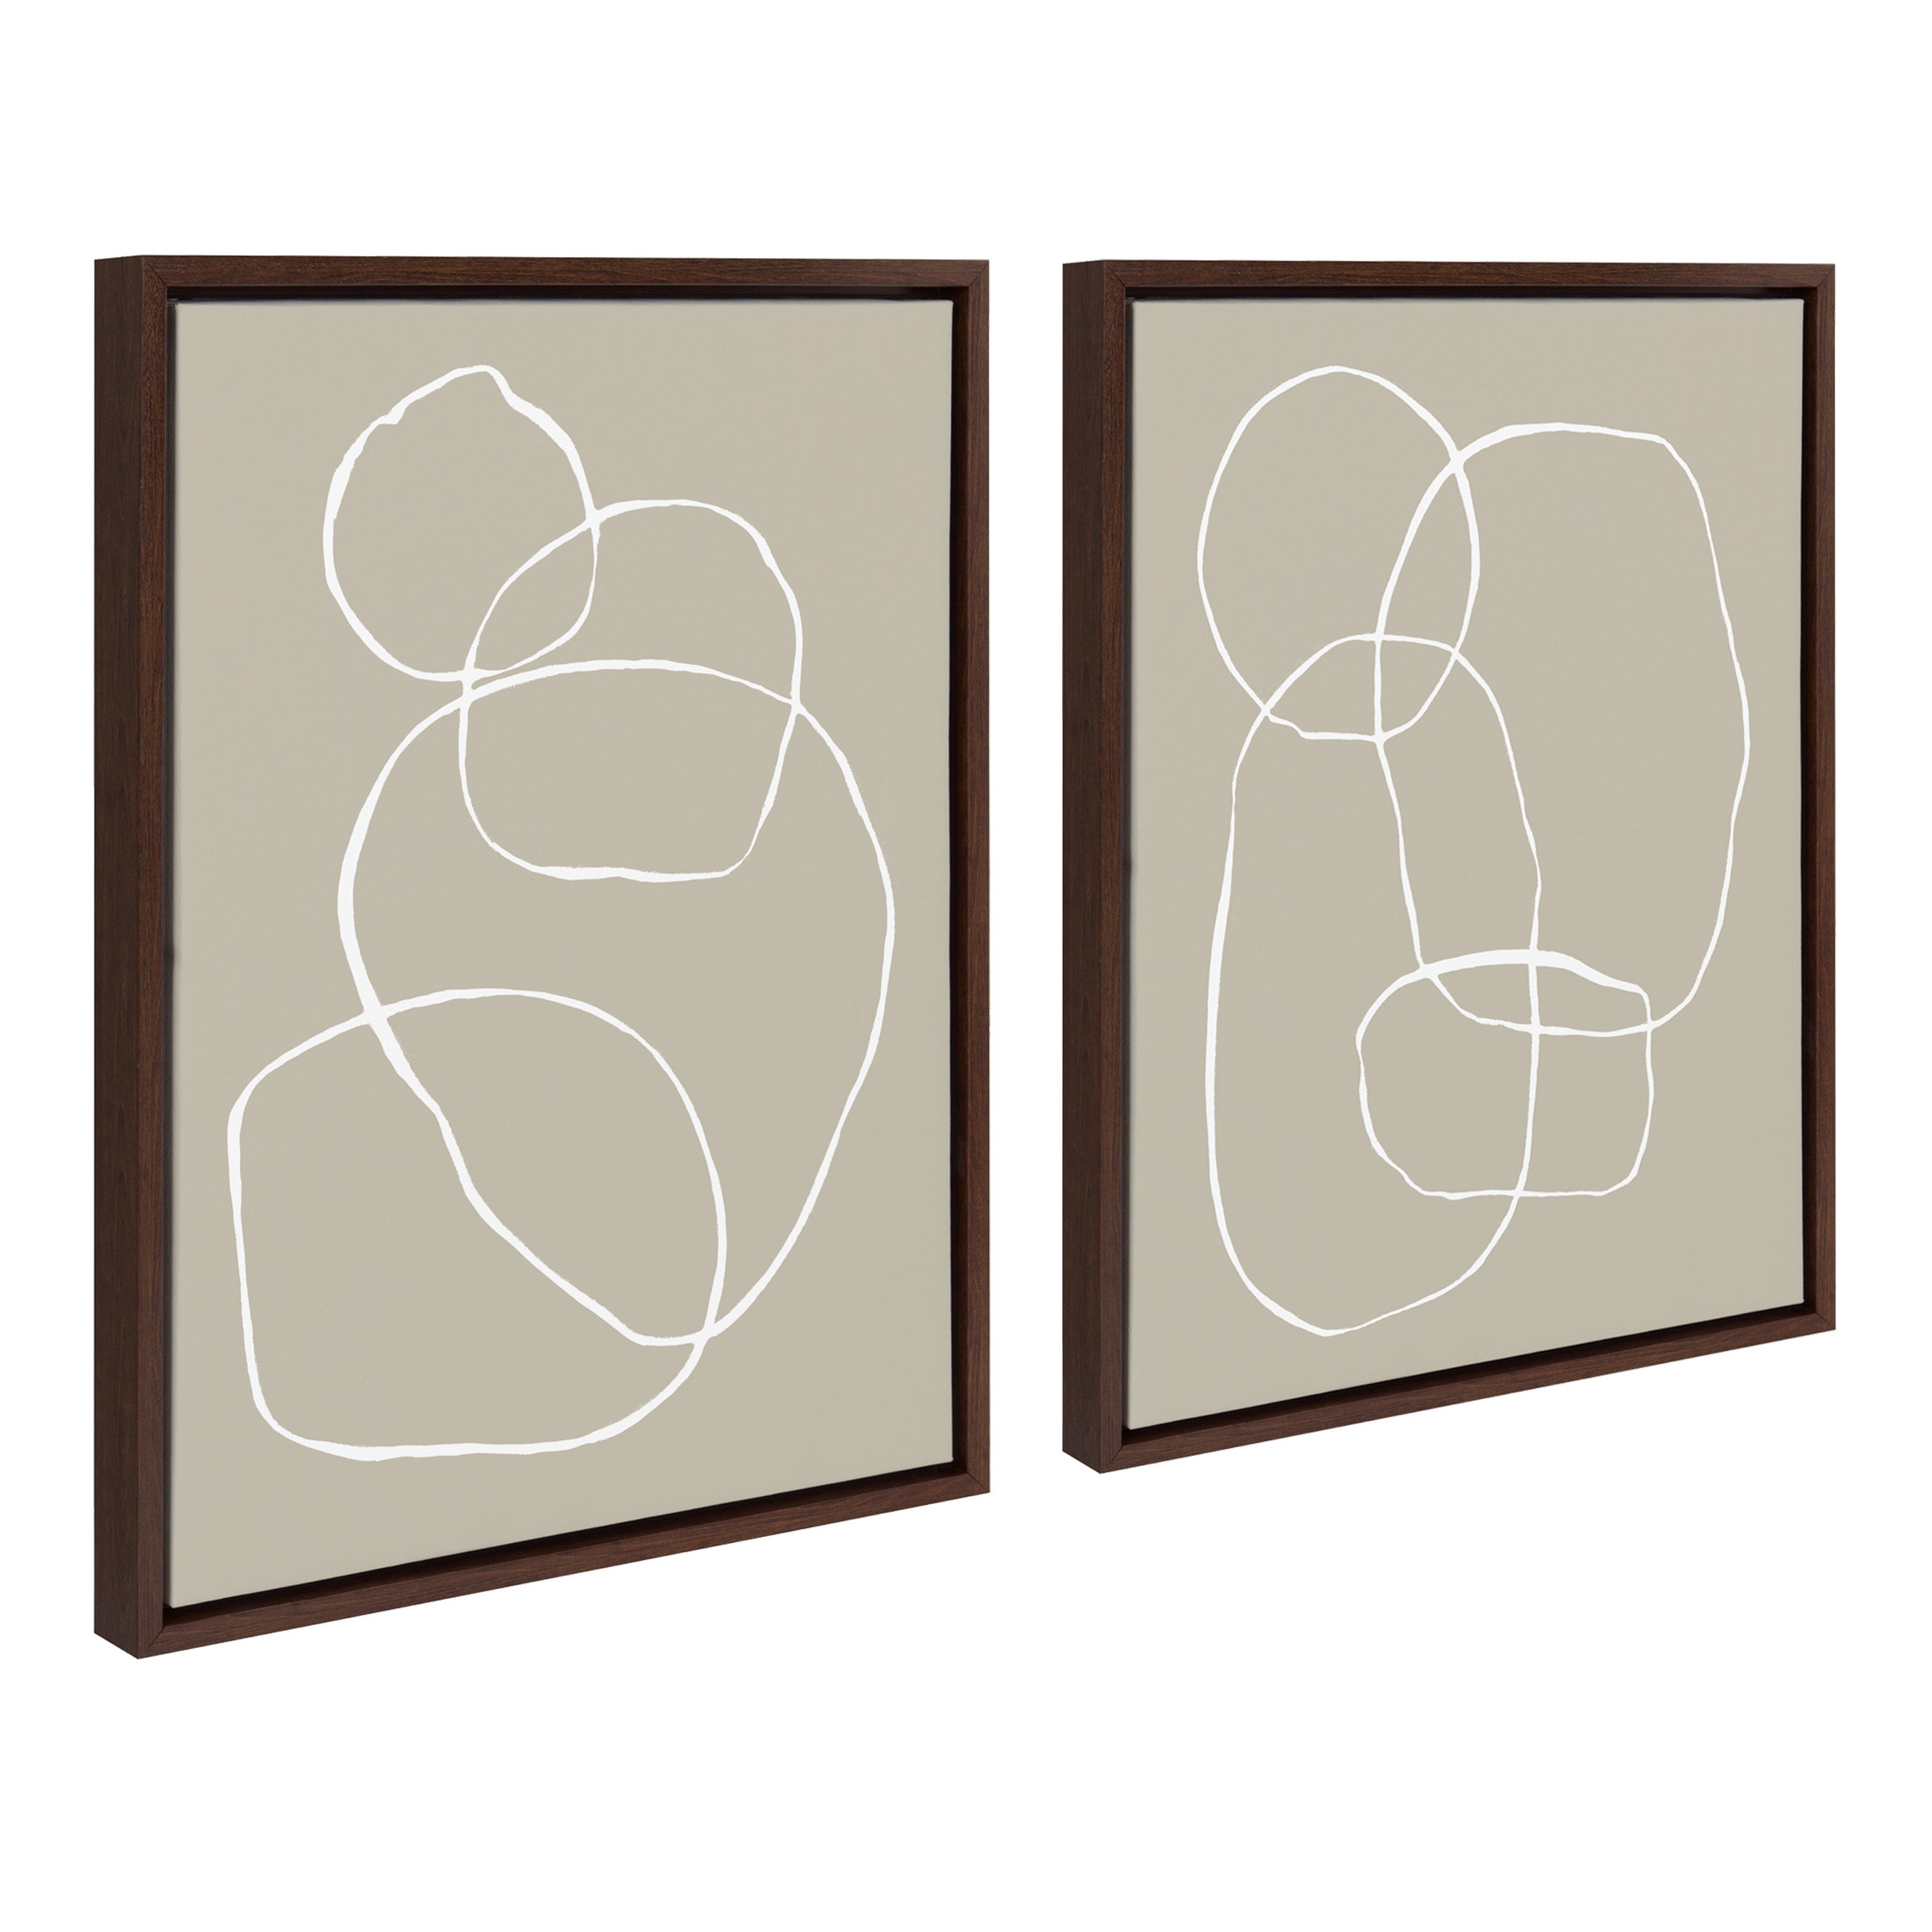 Sylvie Beige Going in Circles Framed Canvas Set by Teju Reval of SnazzyHues